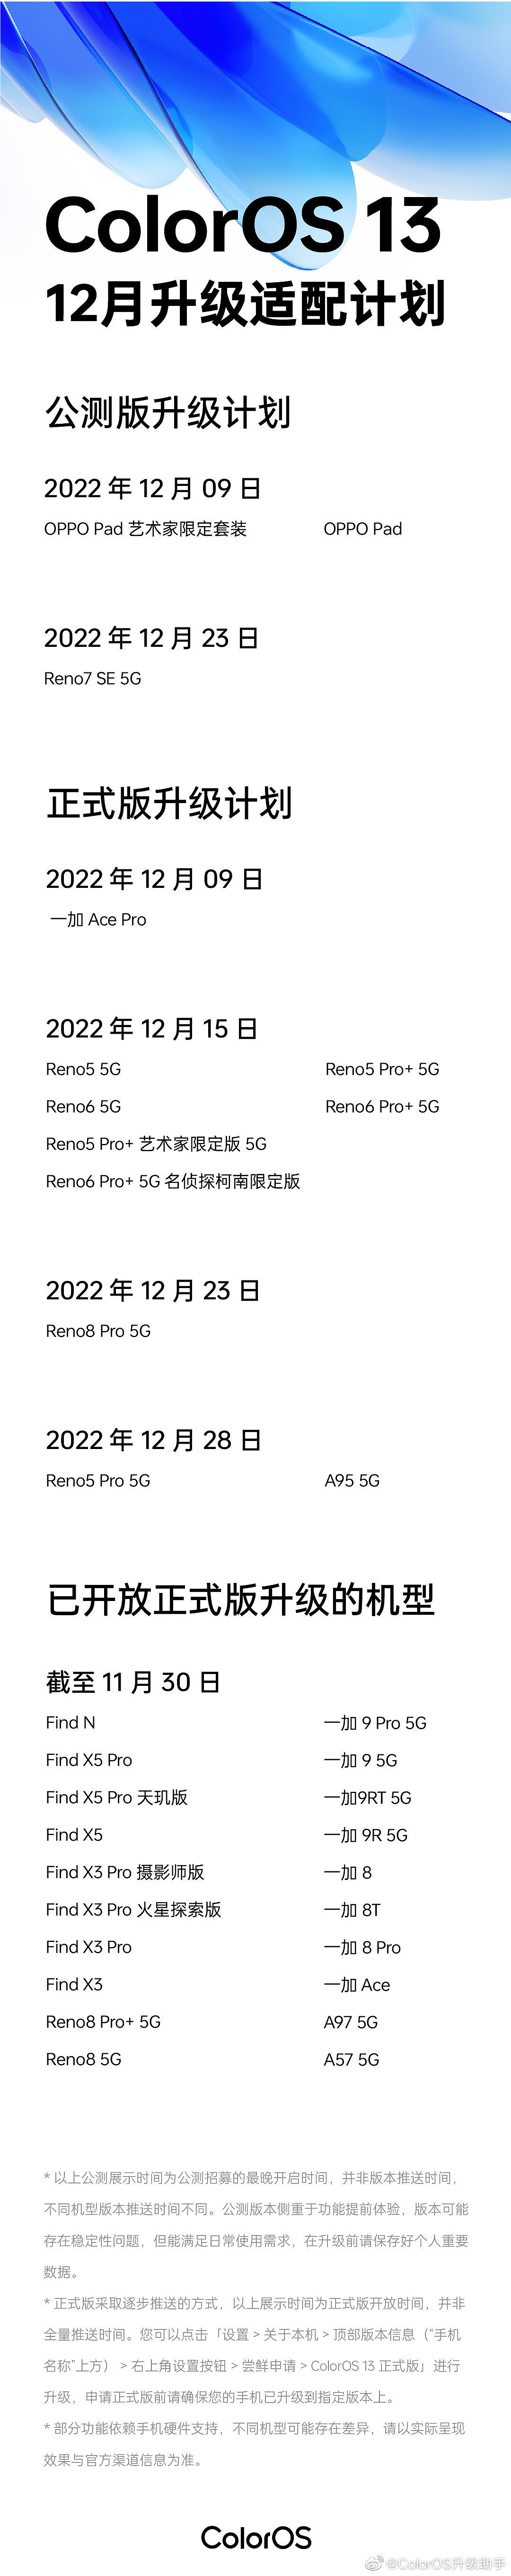 OPPO Reno5/6 Pro+ 5G 开放 ColorOS 13.0 × Android 13 正式版升级 - 3